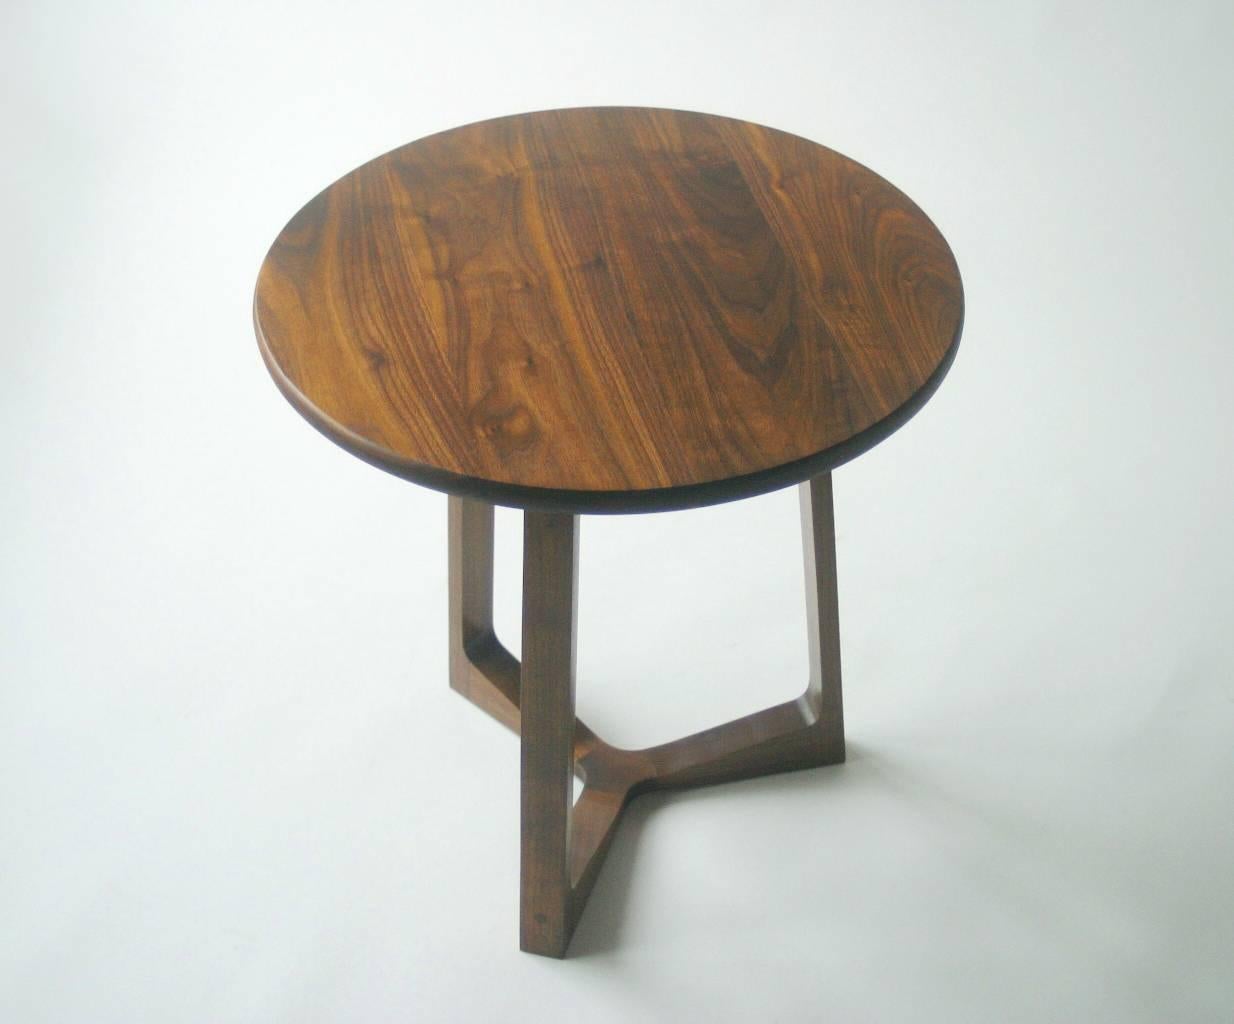 This table represents the simplest kind of modern, with clean lines, an elegantly sculpted base, and enduring hardwood construction. Crafted of solid walnut with exposed joinery and a hand rubbed oil finish, the wood exhibits beautiful depth and